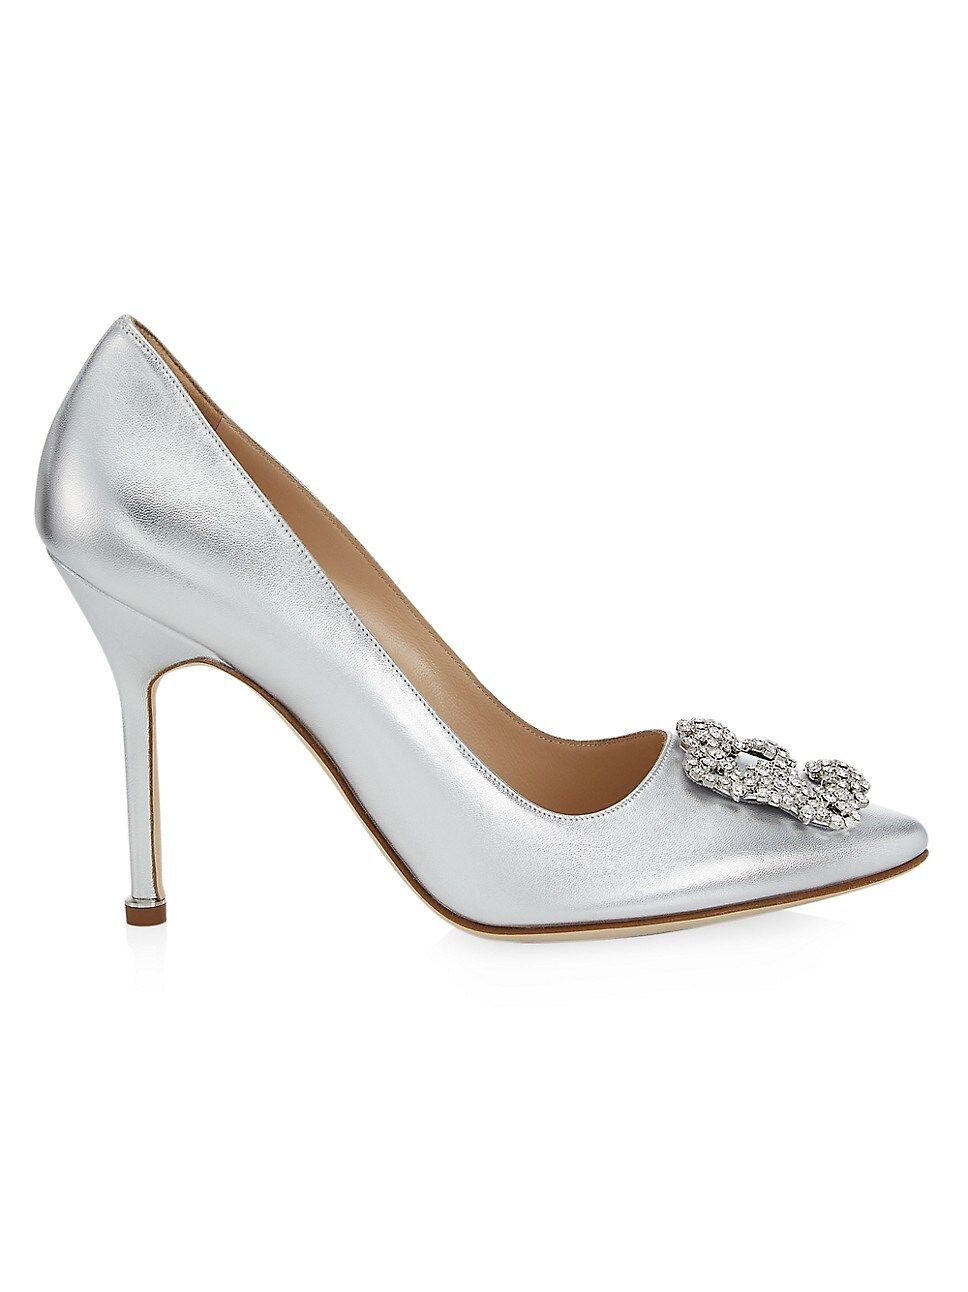 Hangisi 105MM Crystal Buckle Leather Pumps | Saks Fifth Avenue